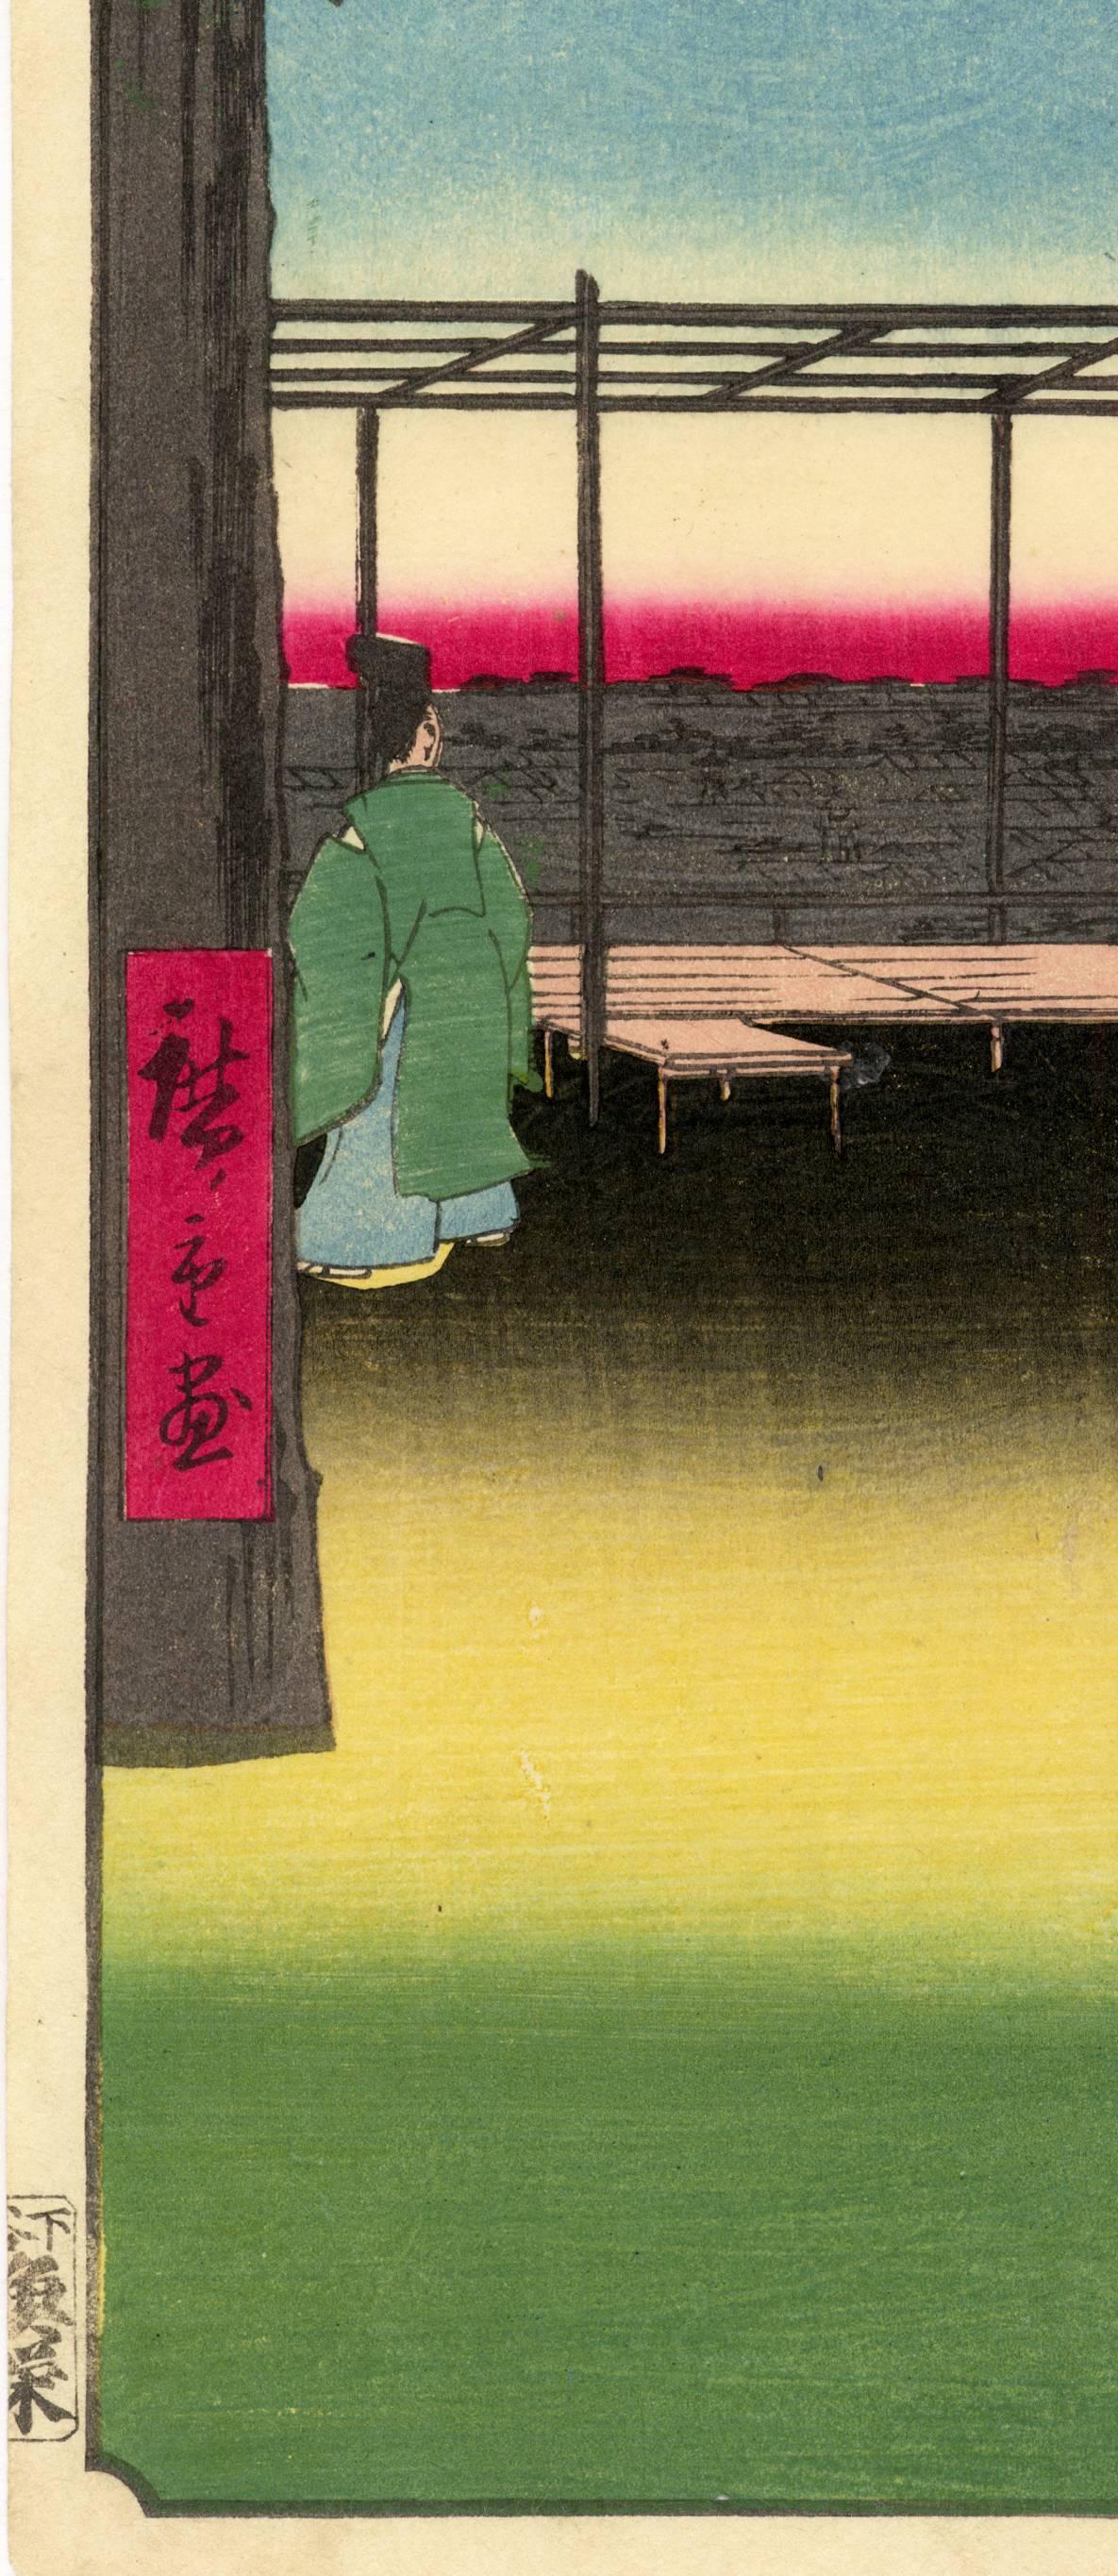 Original Japanese color woodblock print. Dawn breaks over the city of Edo, and Hiroshige has chosen to portray a most indirect and subtle point of view. We see a priest, a shrine maiden and an attendant getting ready for the day at Kanda Myojin